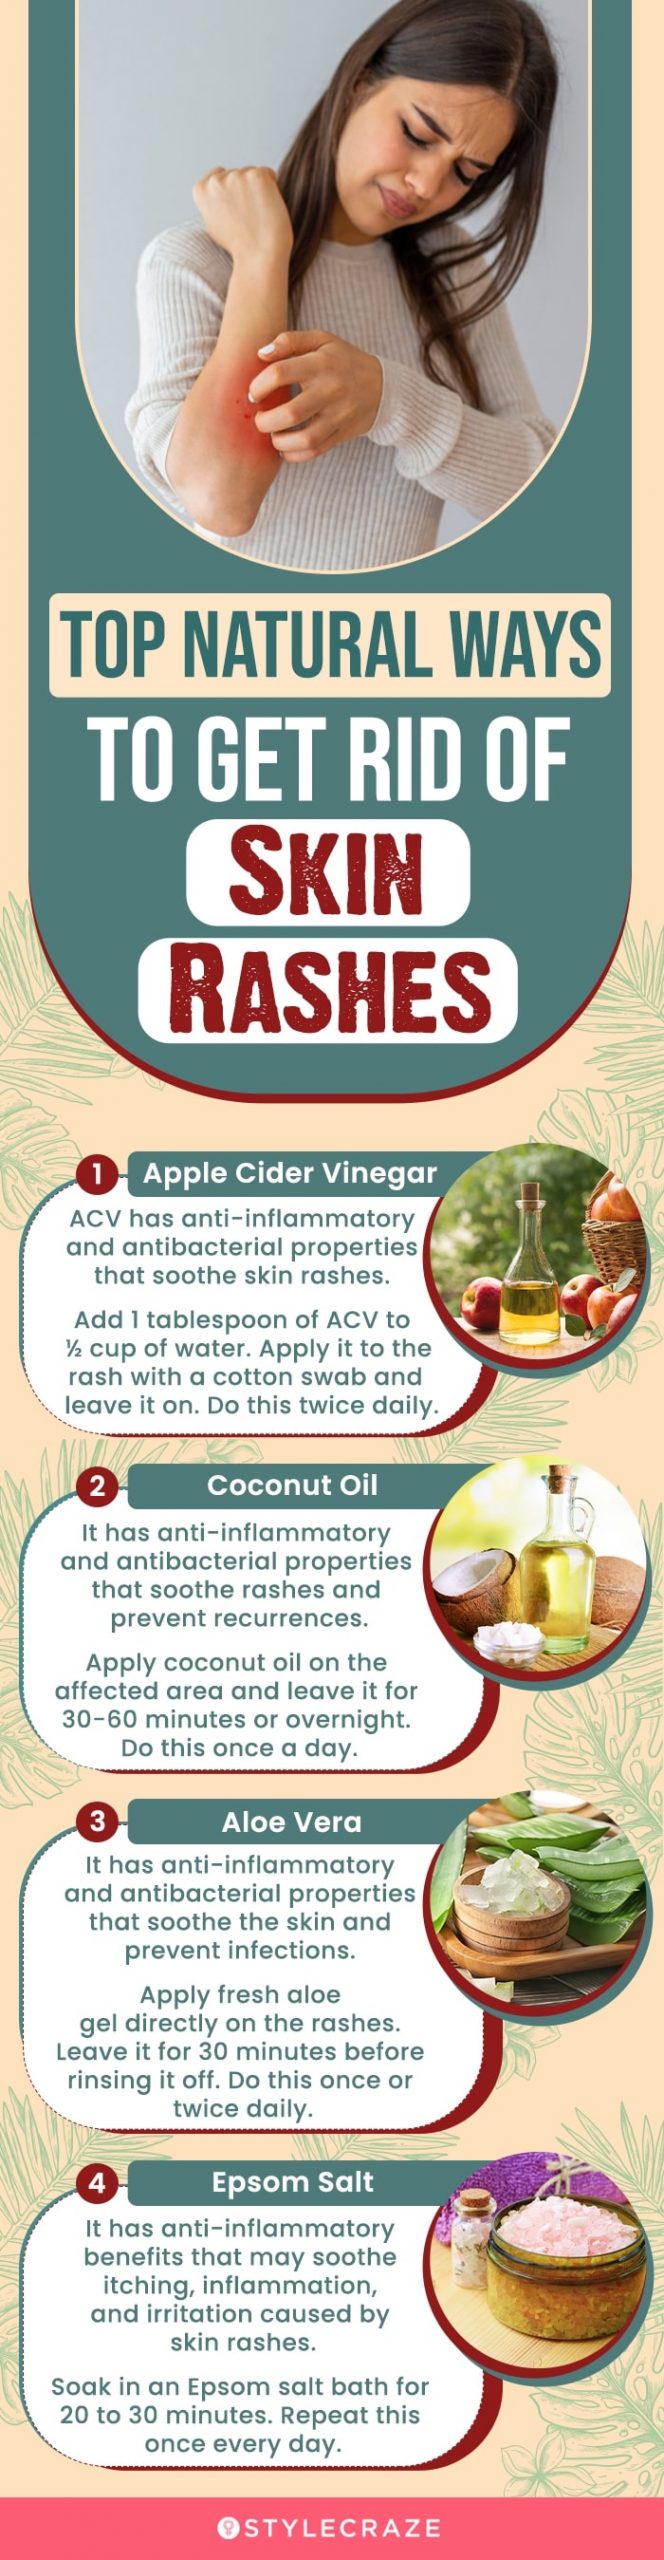 top natural ways to get rid of skin rashes [infographic]